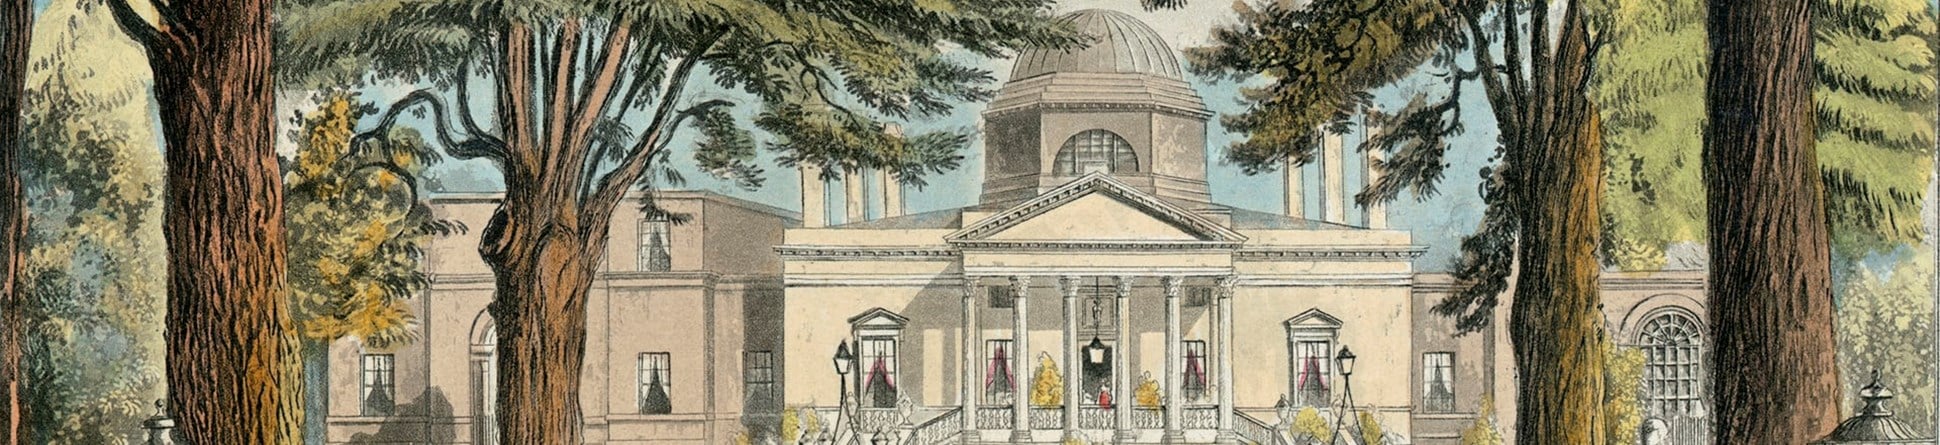 Engraving showing the tree-lined path leading up to the front of Chiswick House